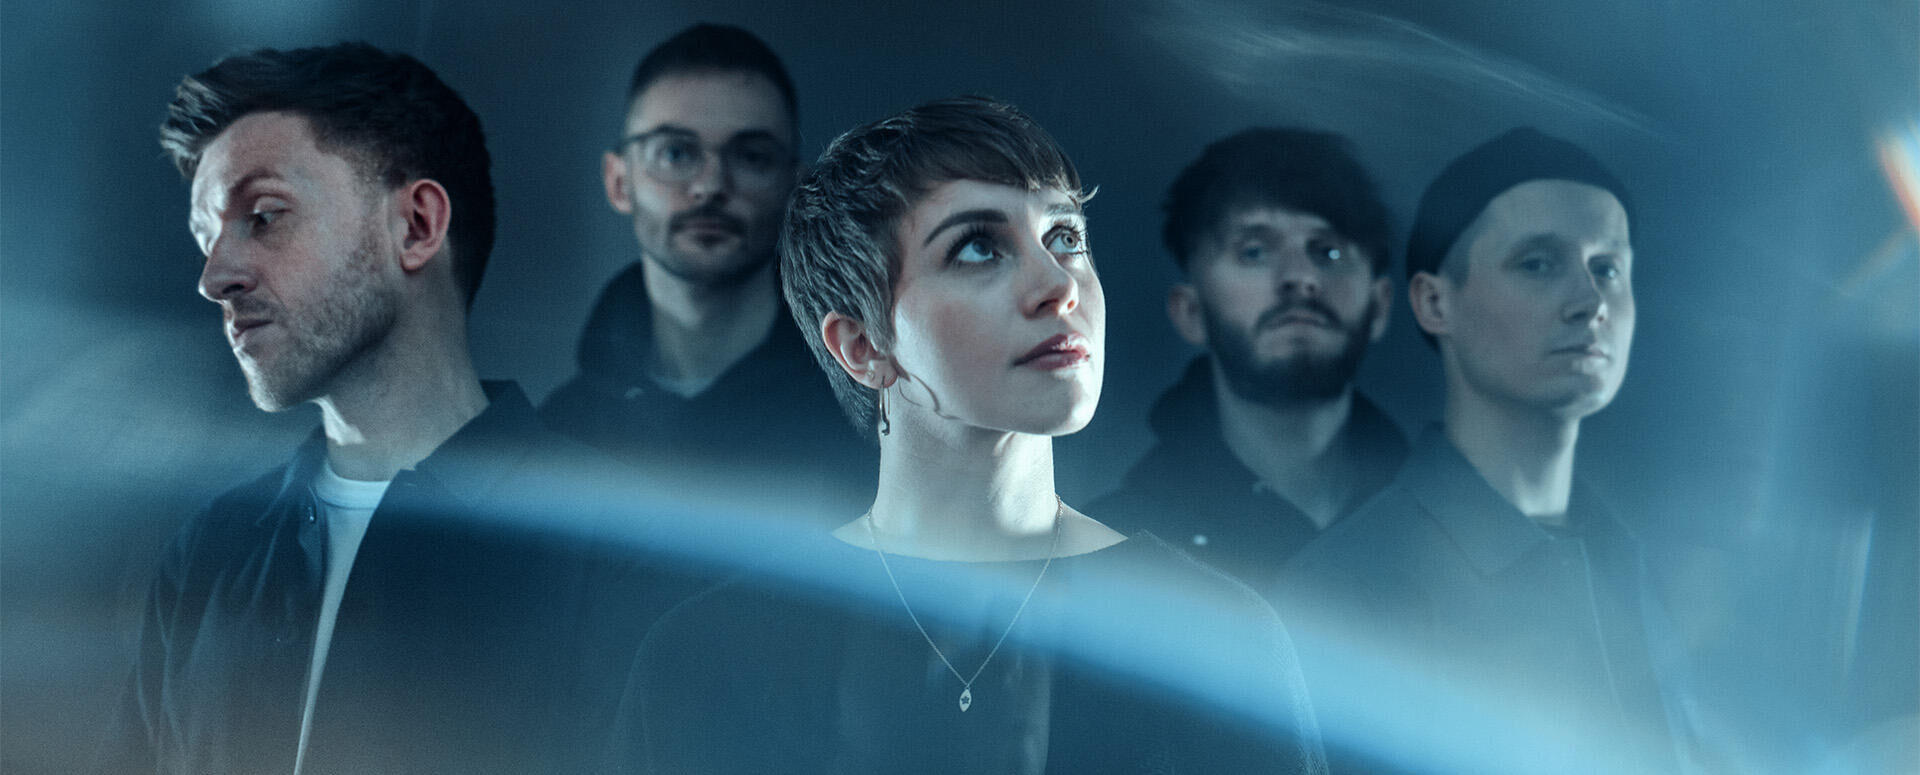 Rolo Tomassi + Holy Fawn + Heriot